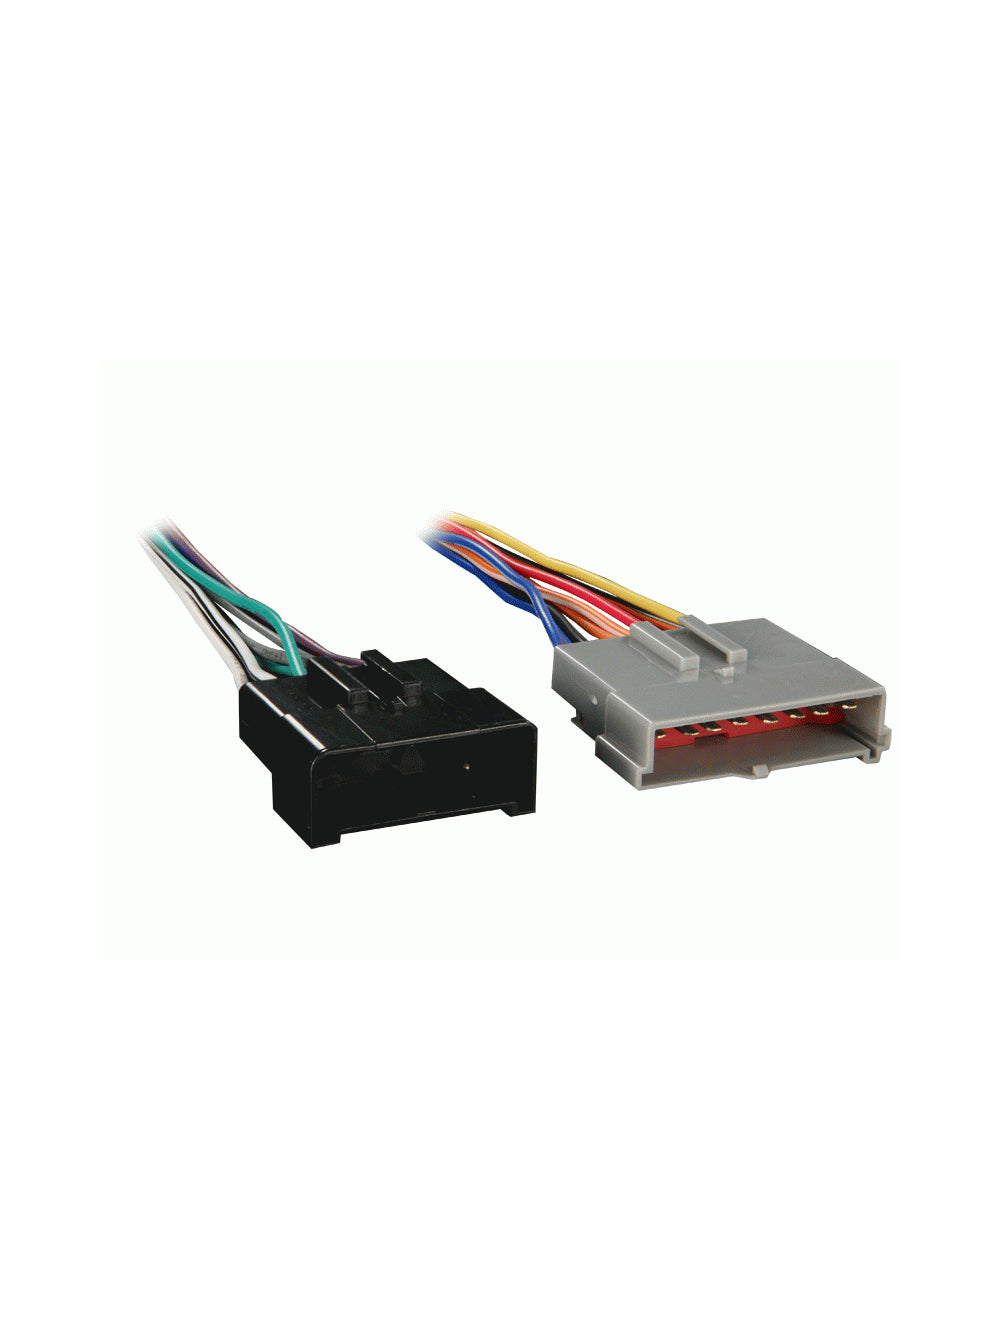 Metra 70-5602 Premiem System Harness for Ford 94-97